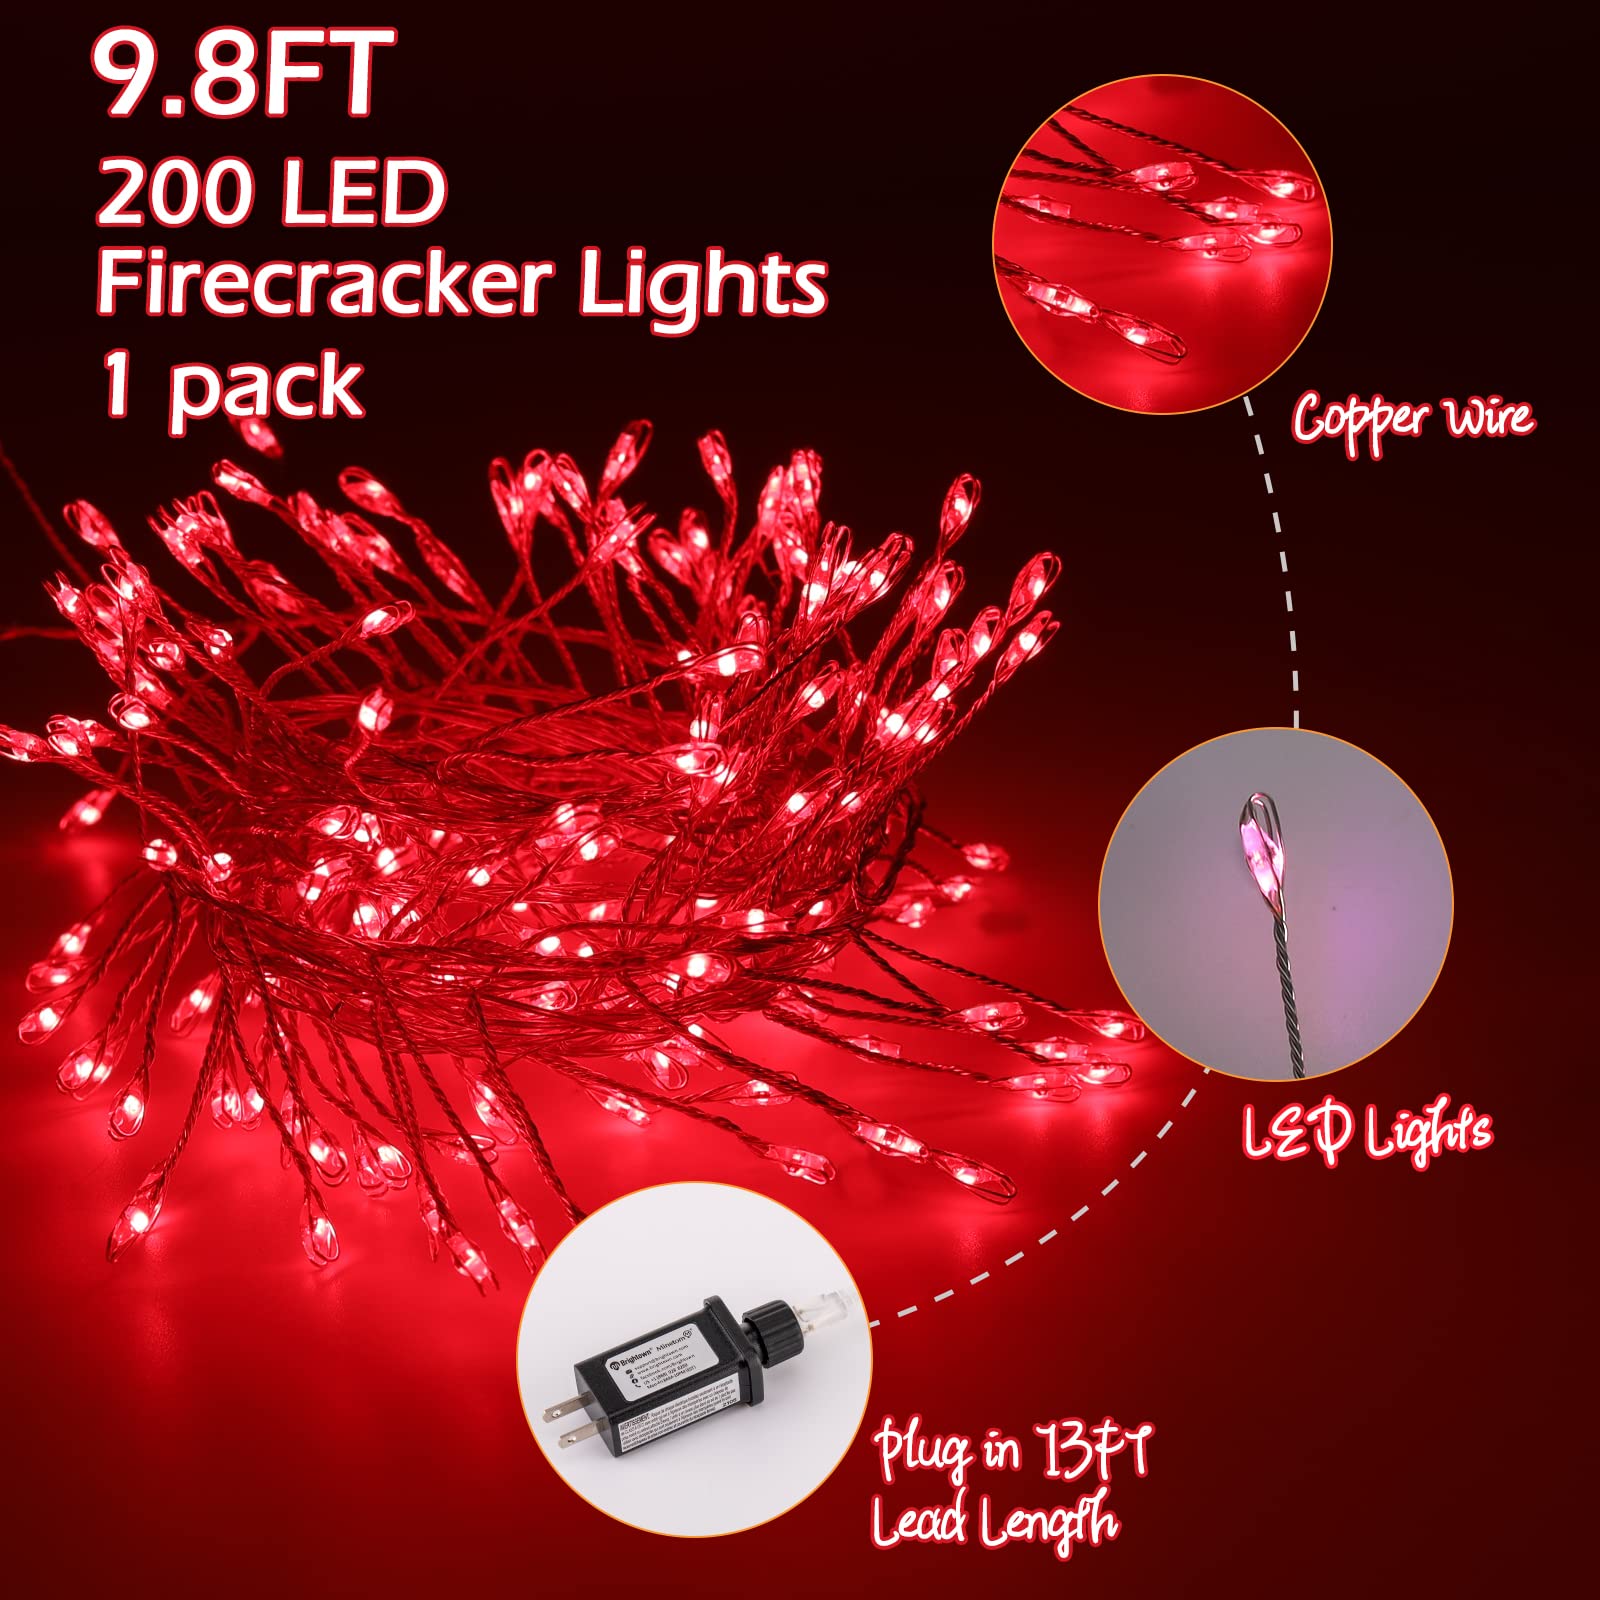 1 x 10 Feet / 200 LED / Red / Silver Wire